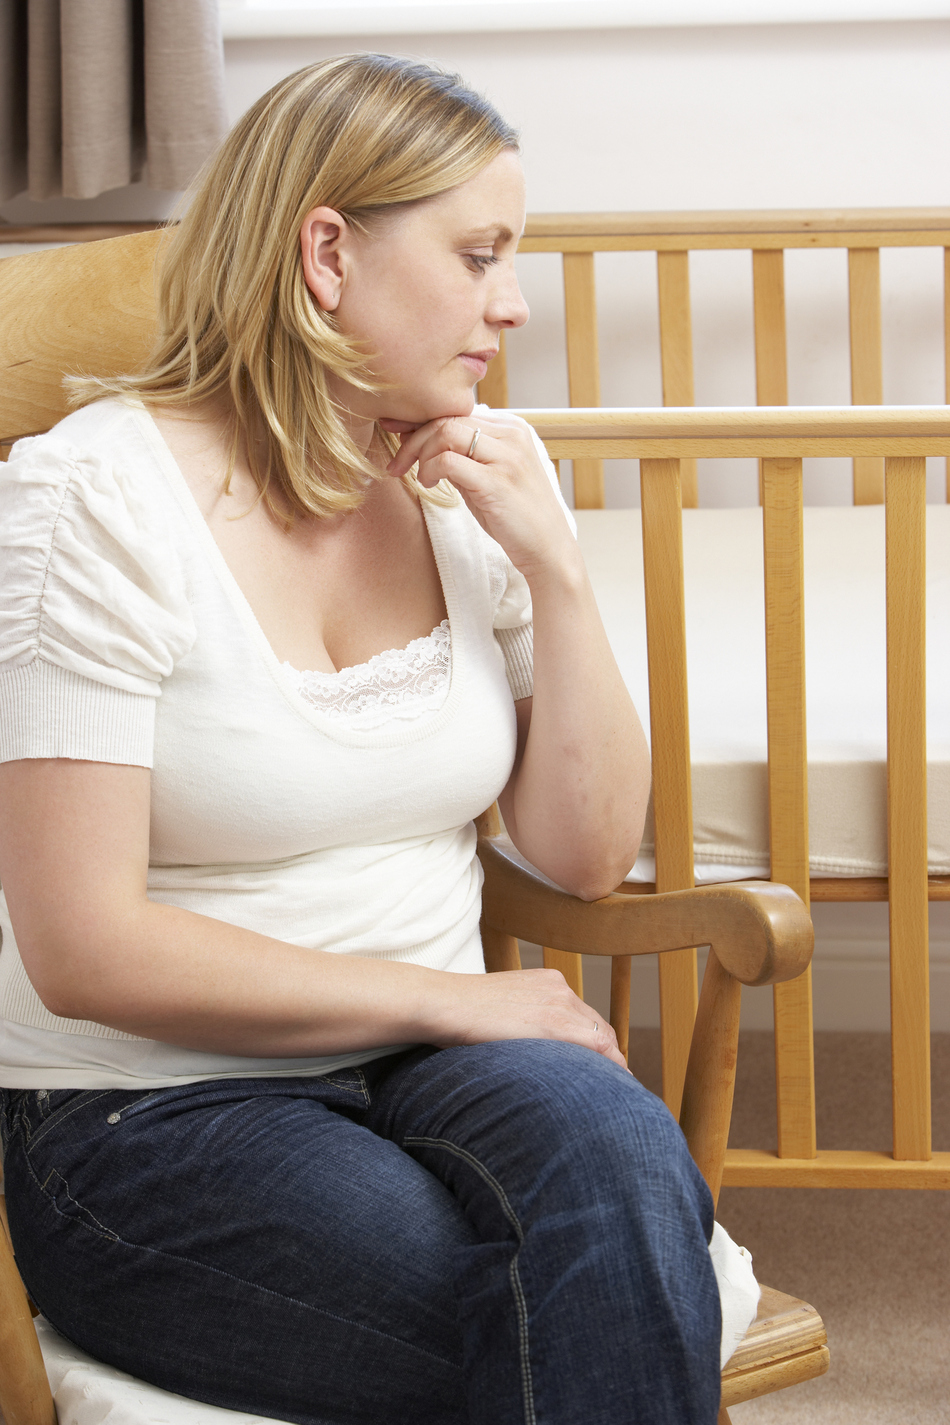 How Long After a Miscarriage to Try Again?